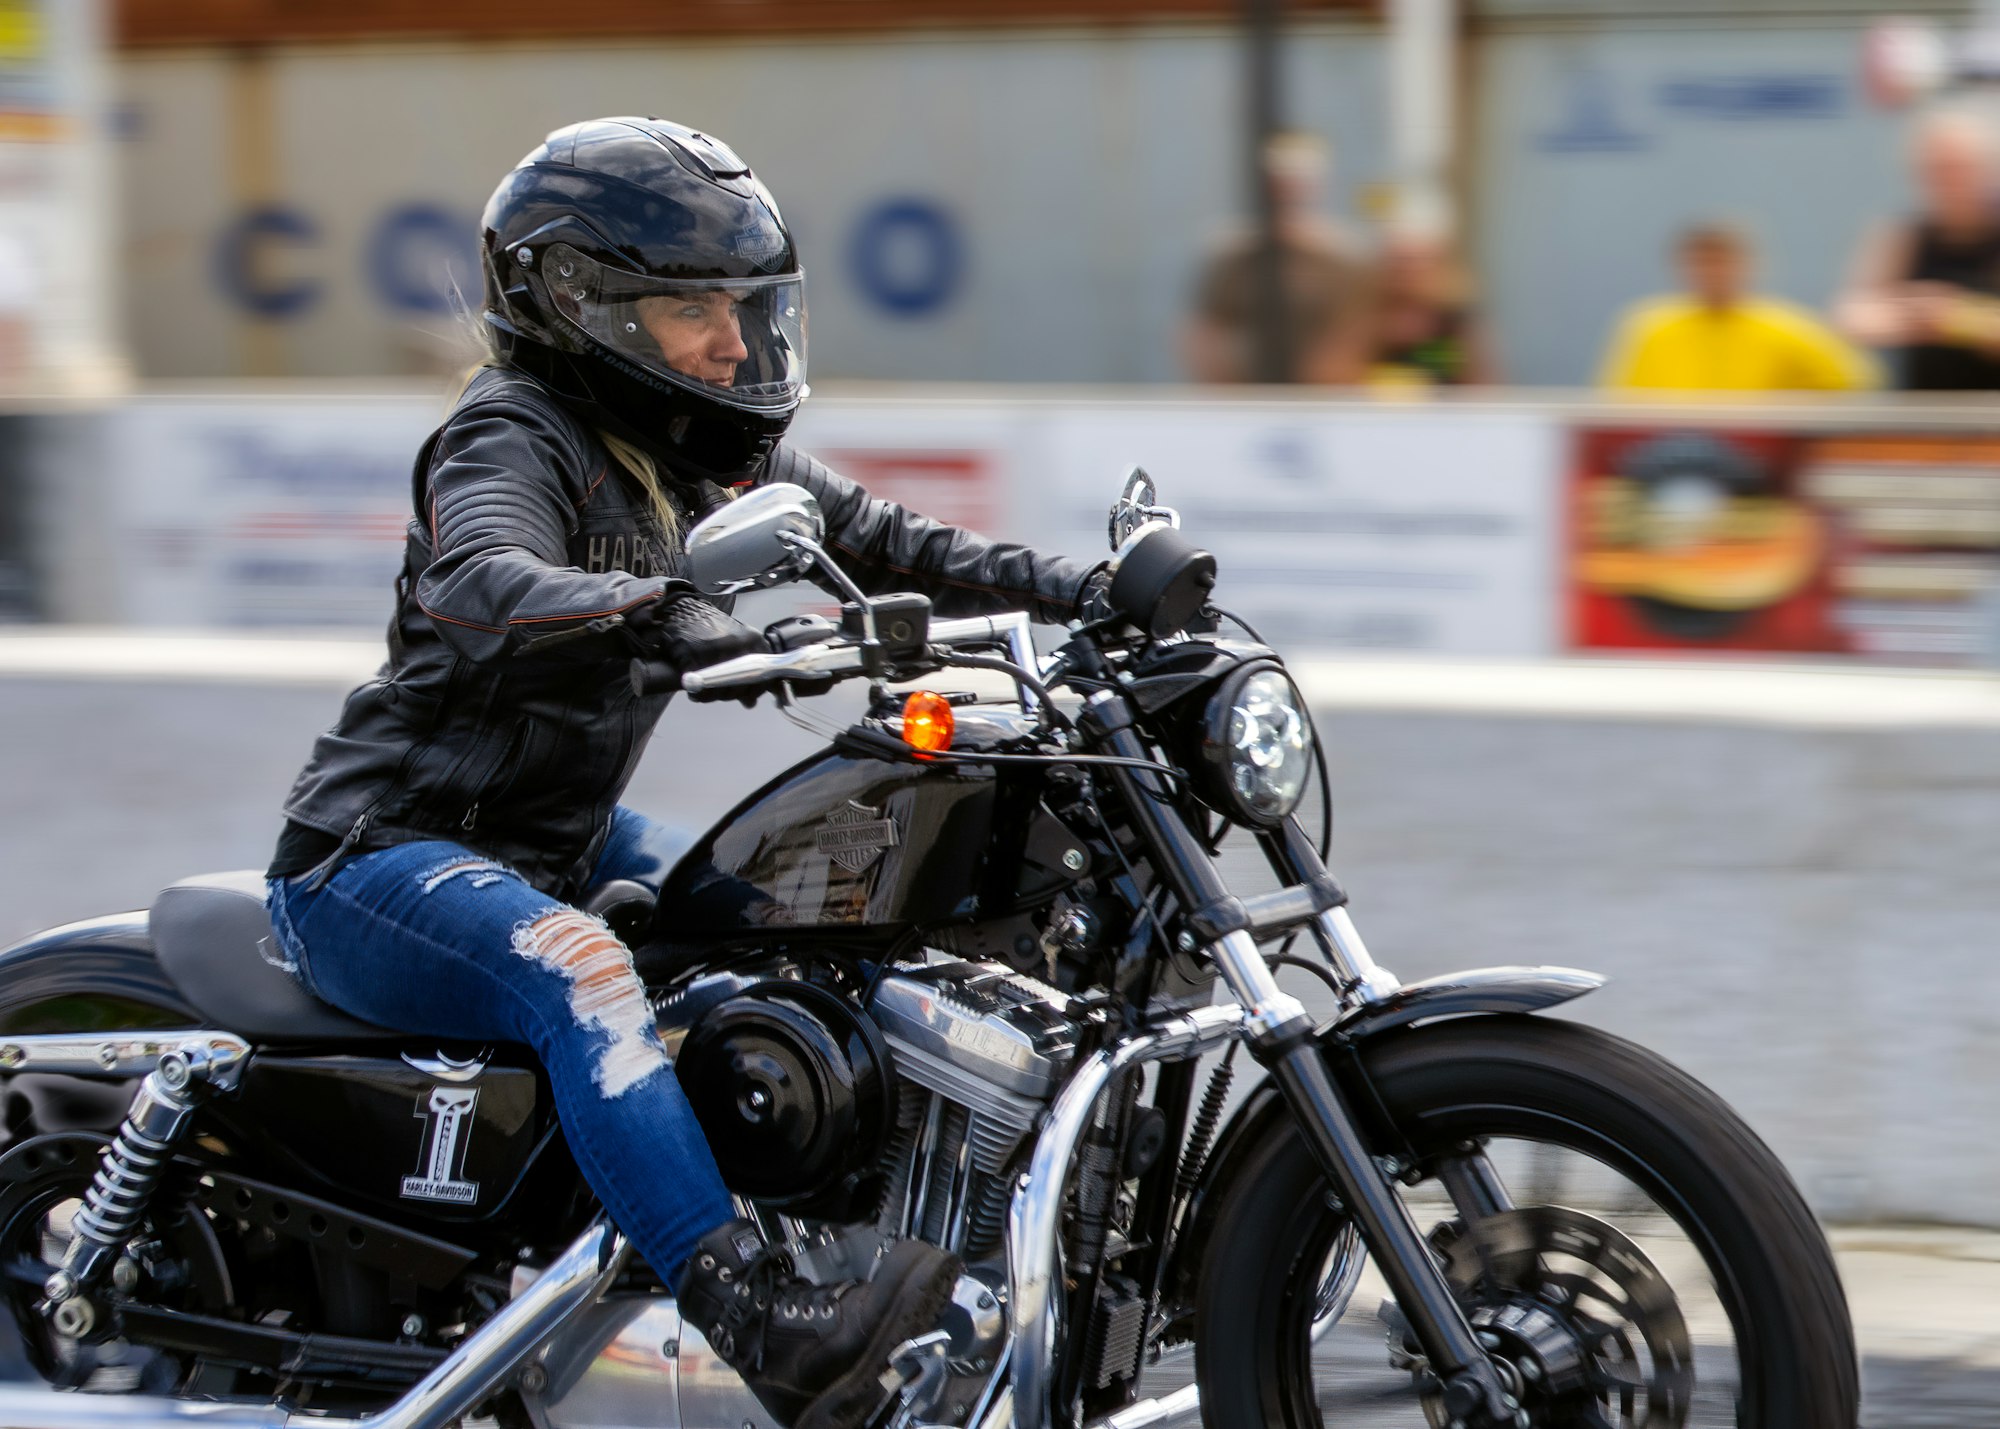 Woman riding motorcycle wearing helmet and ripped jeans.